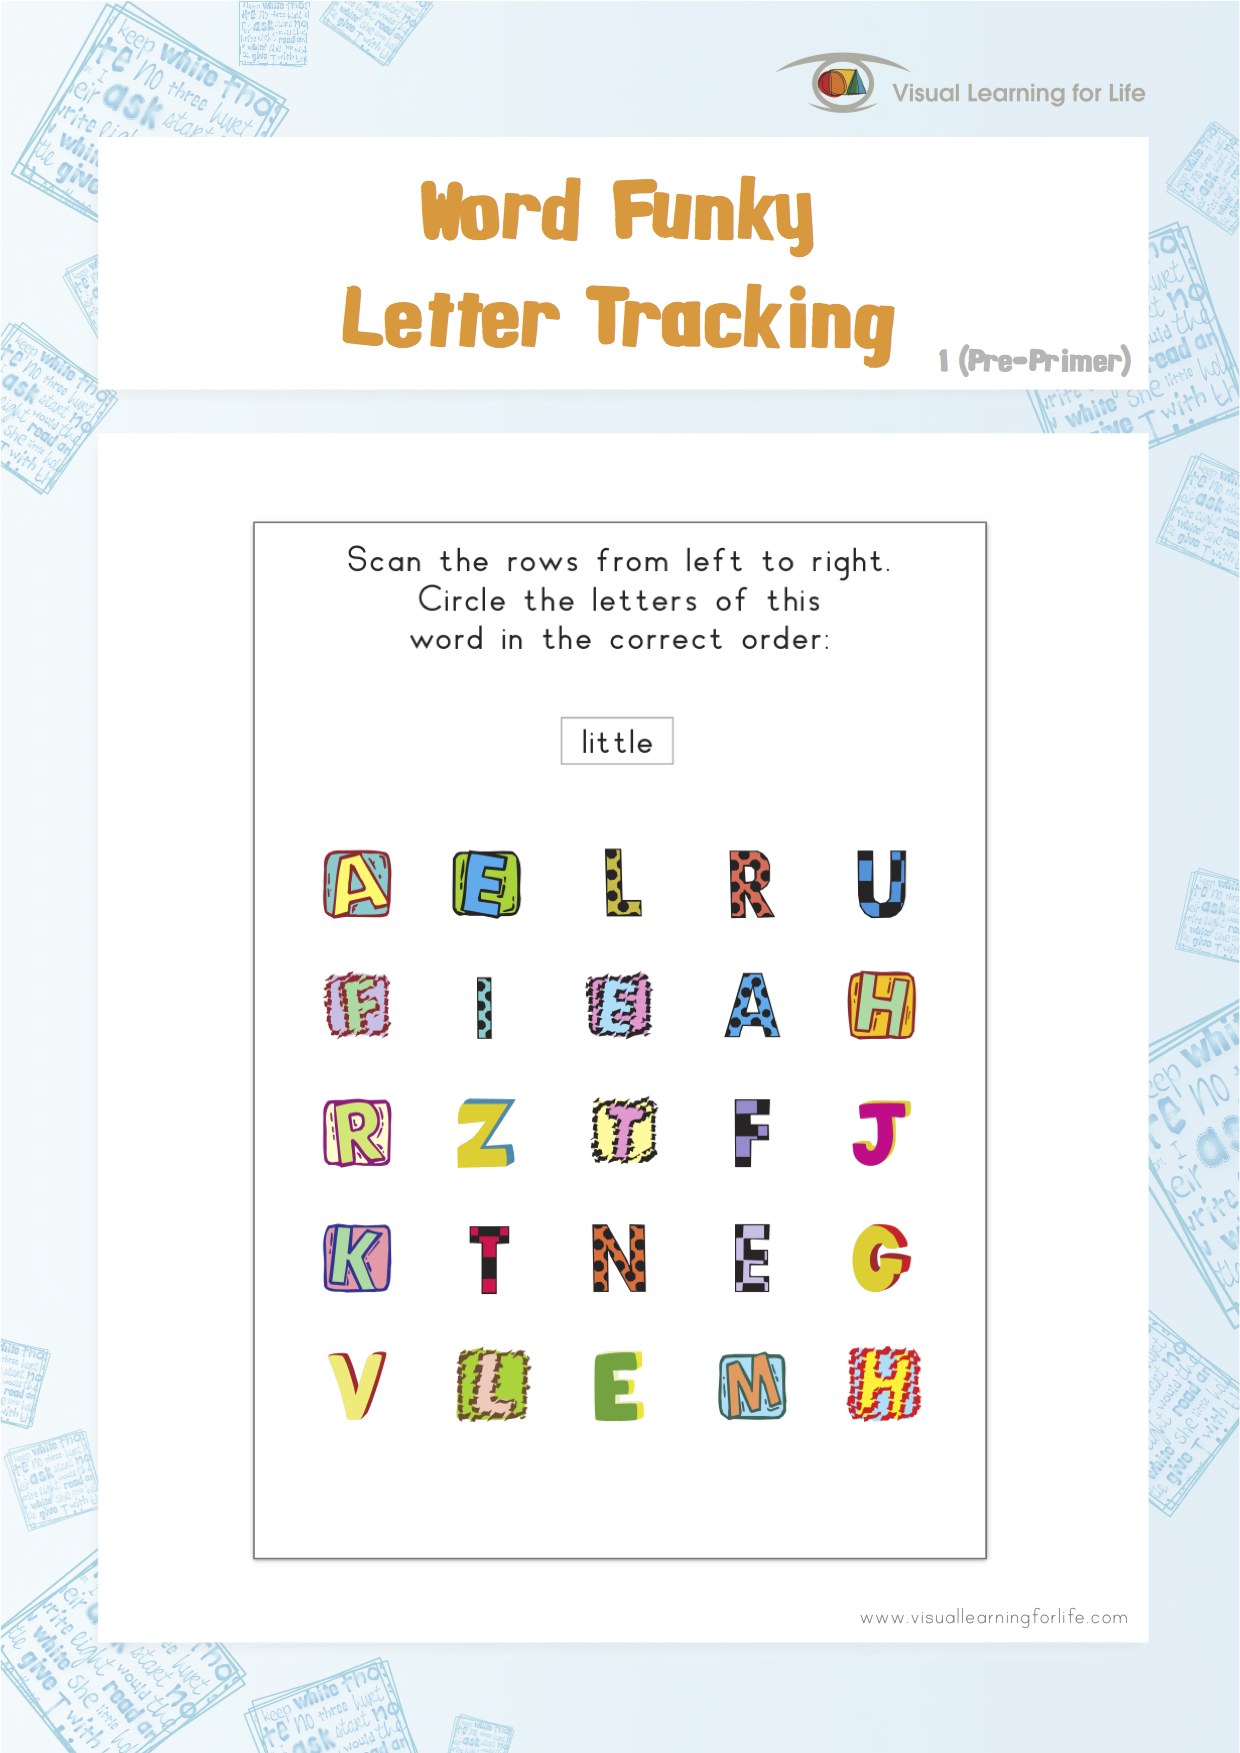 Word Funky Letter Tracking 1